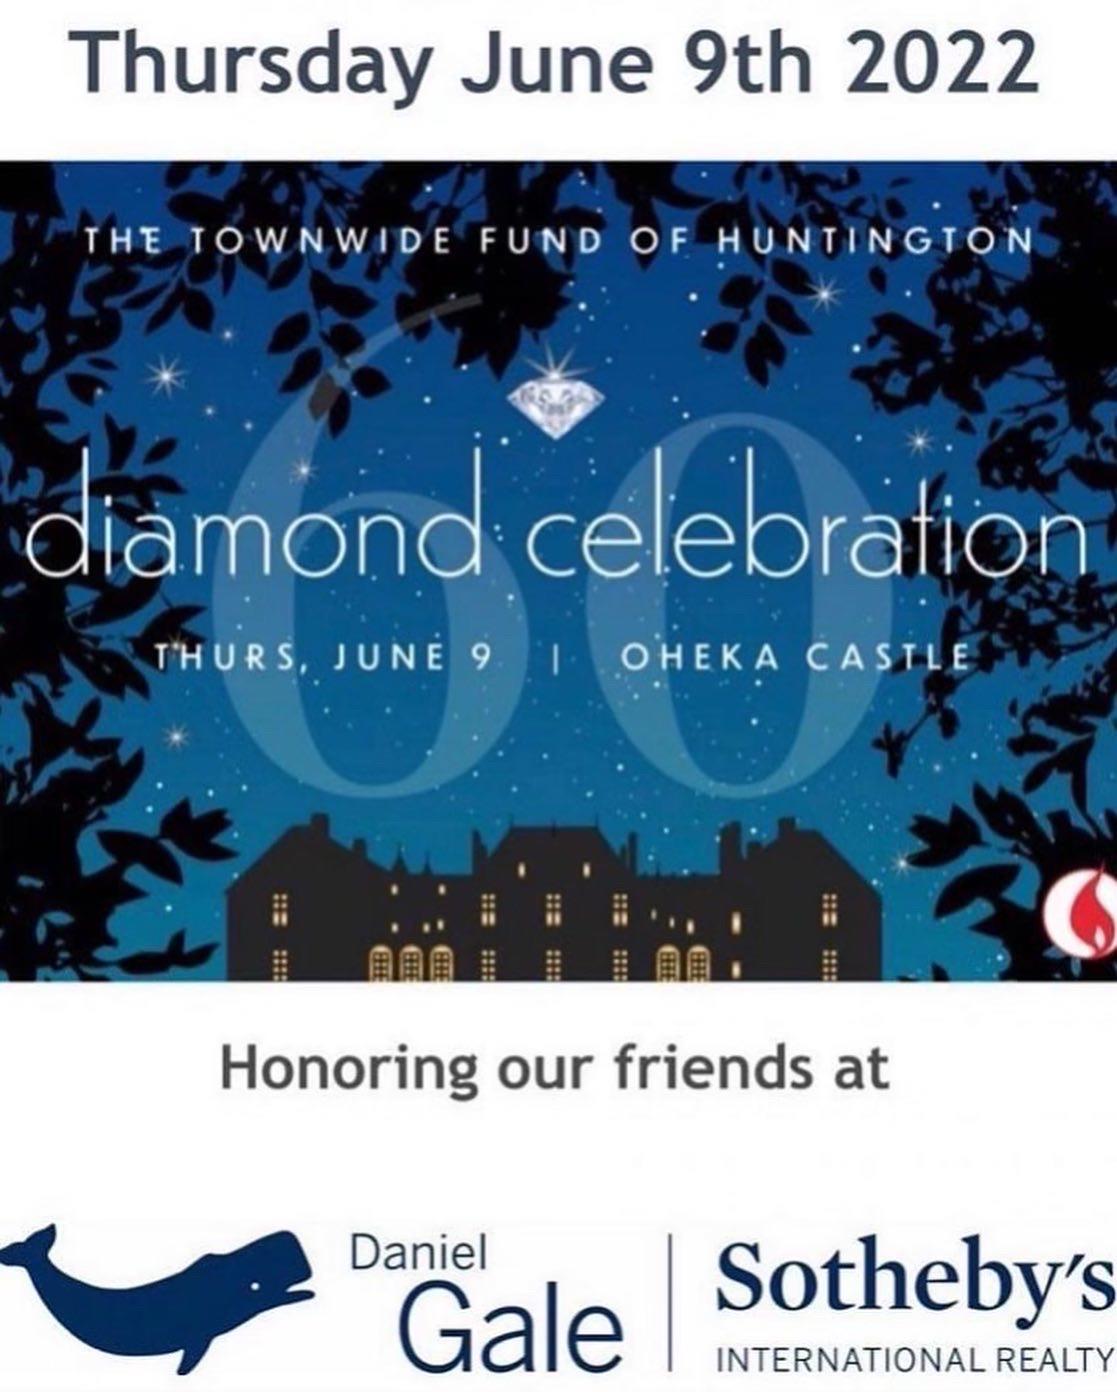 Thursday June 9th 2022 THE TOWNWIDE FUND OF HUNTINGTON diamond celebration THURS, JUNE 9 1 OHEKA CASTLE + Honoring our friends at Daniel Gale HD CH C Sotheby's INTERNATIONAL REALTY H